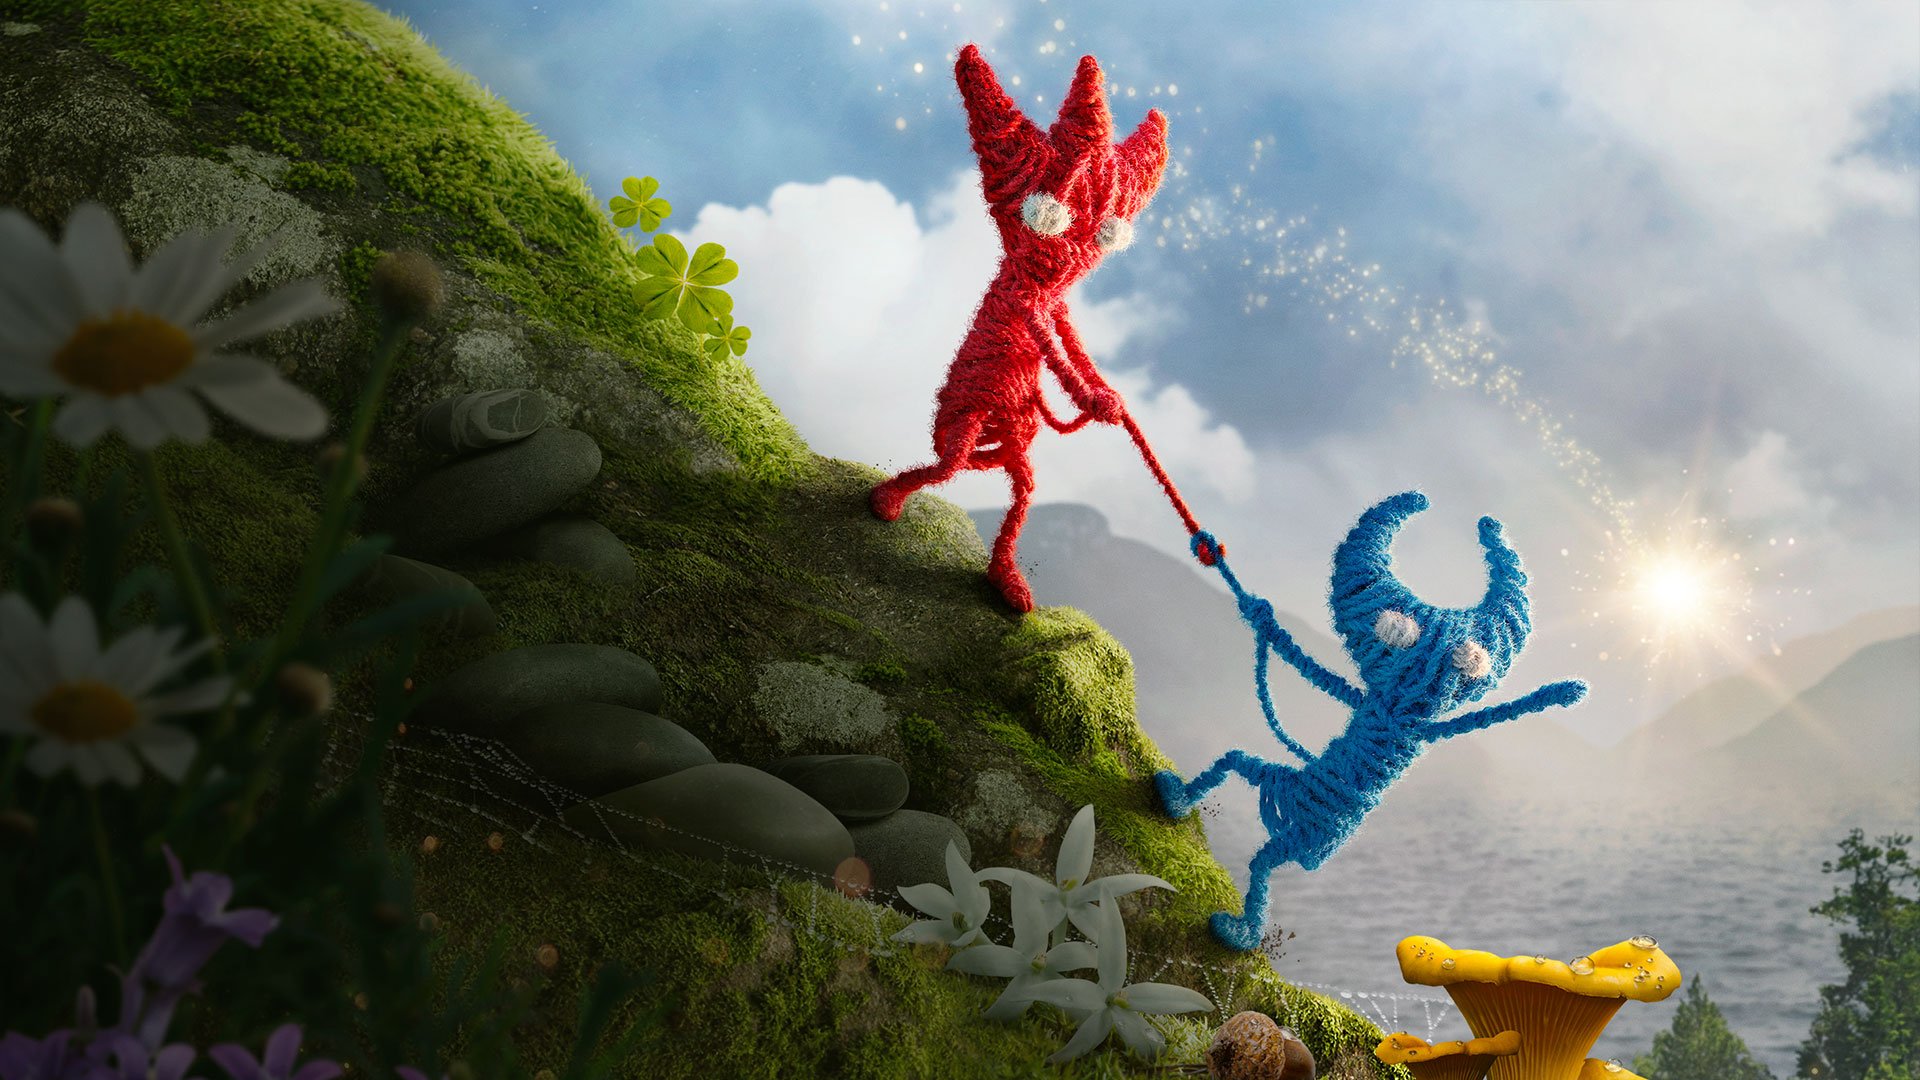 This week’s Deals with Gold and Spotlight sales feature Unravel Two and Dead Rising 4